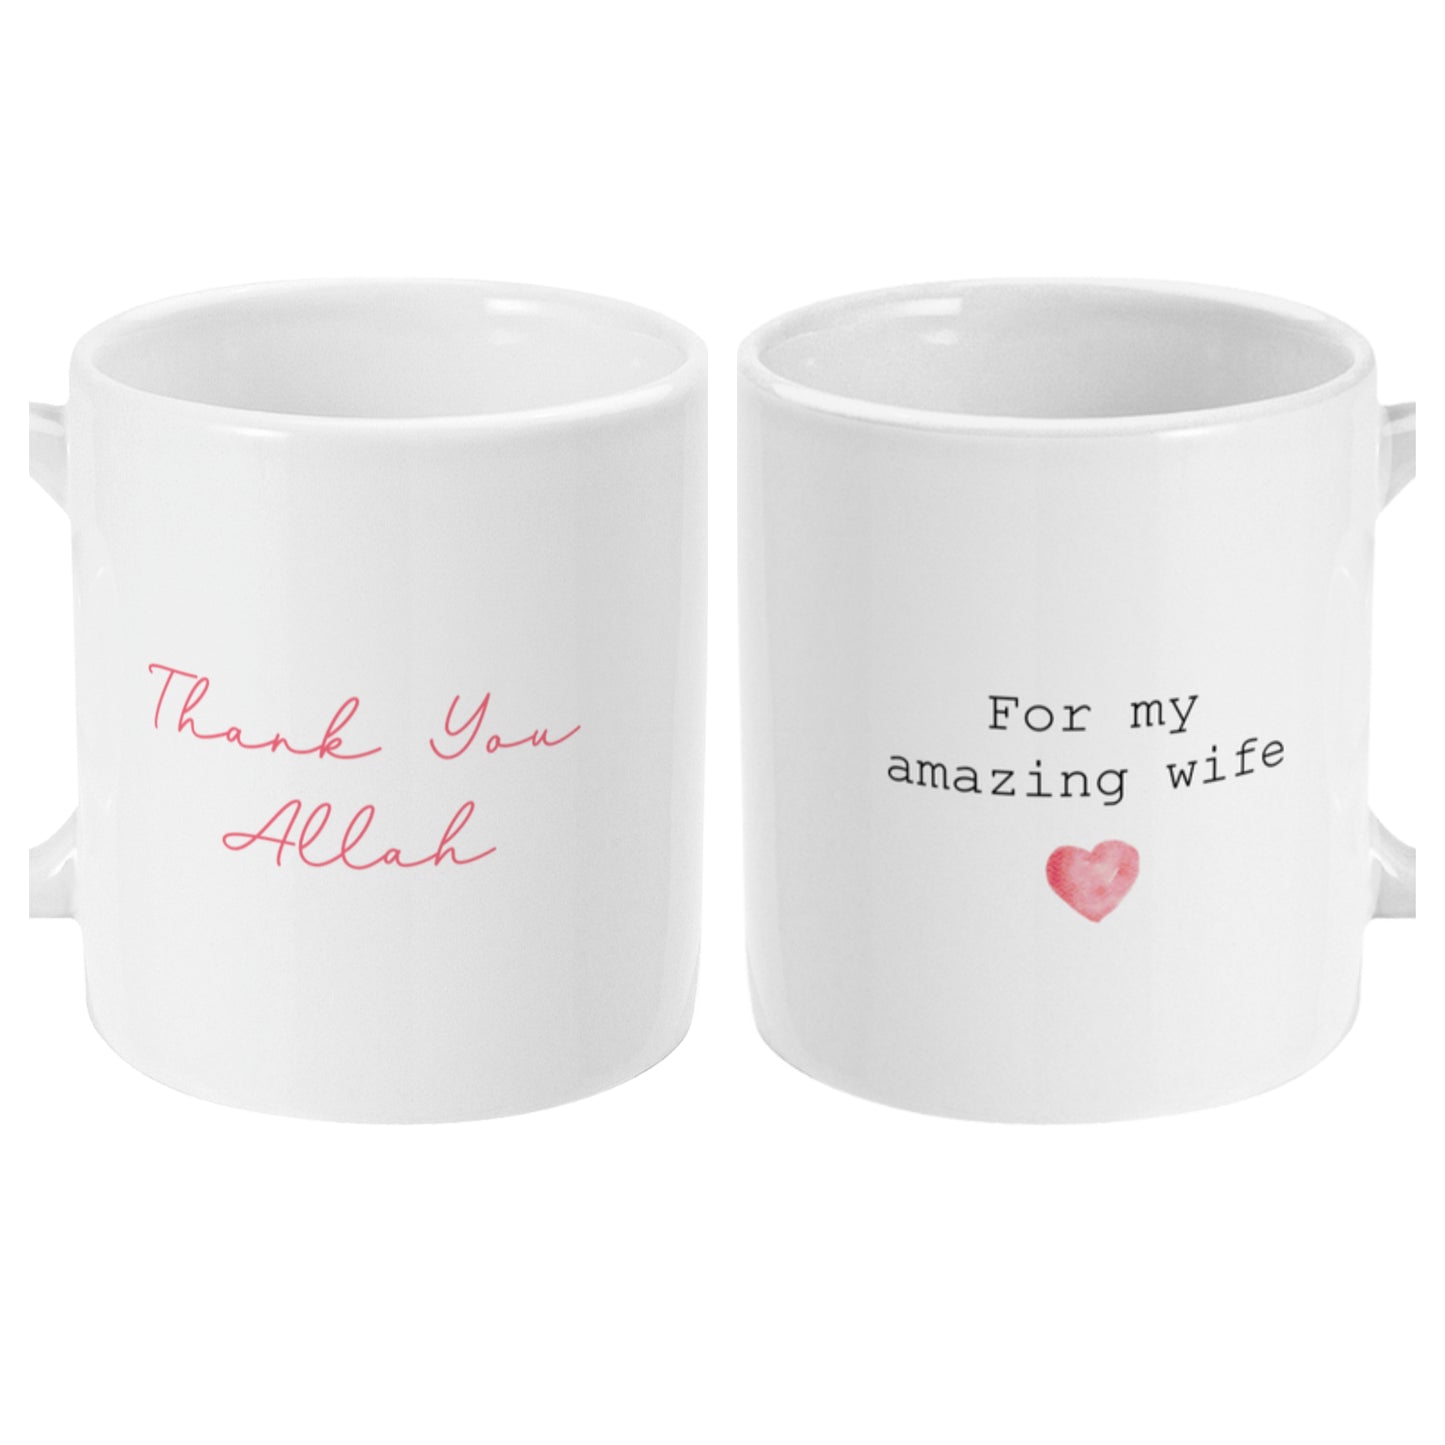 Thank you Allah for my amazing wife - White Mug